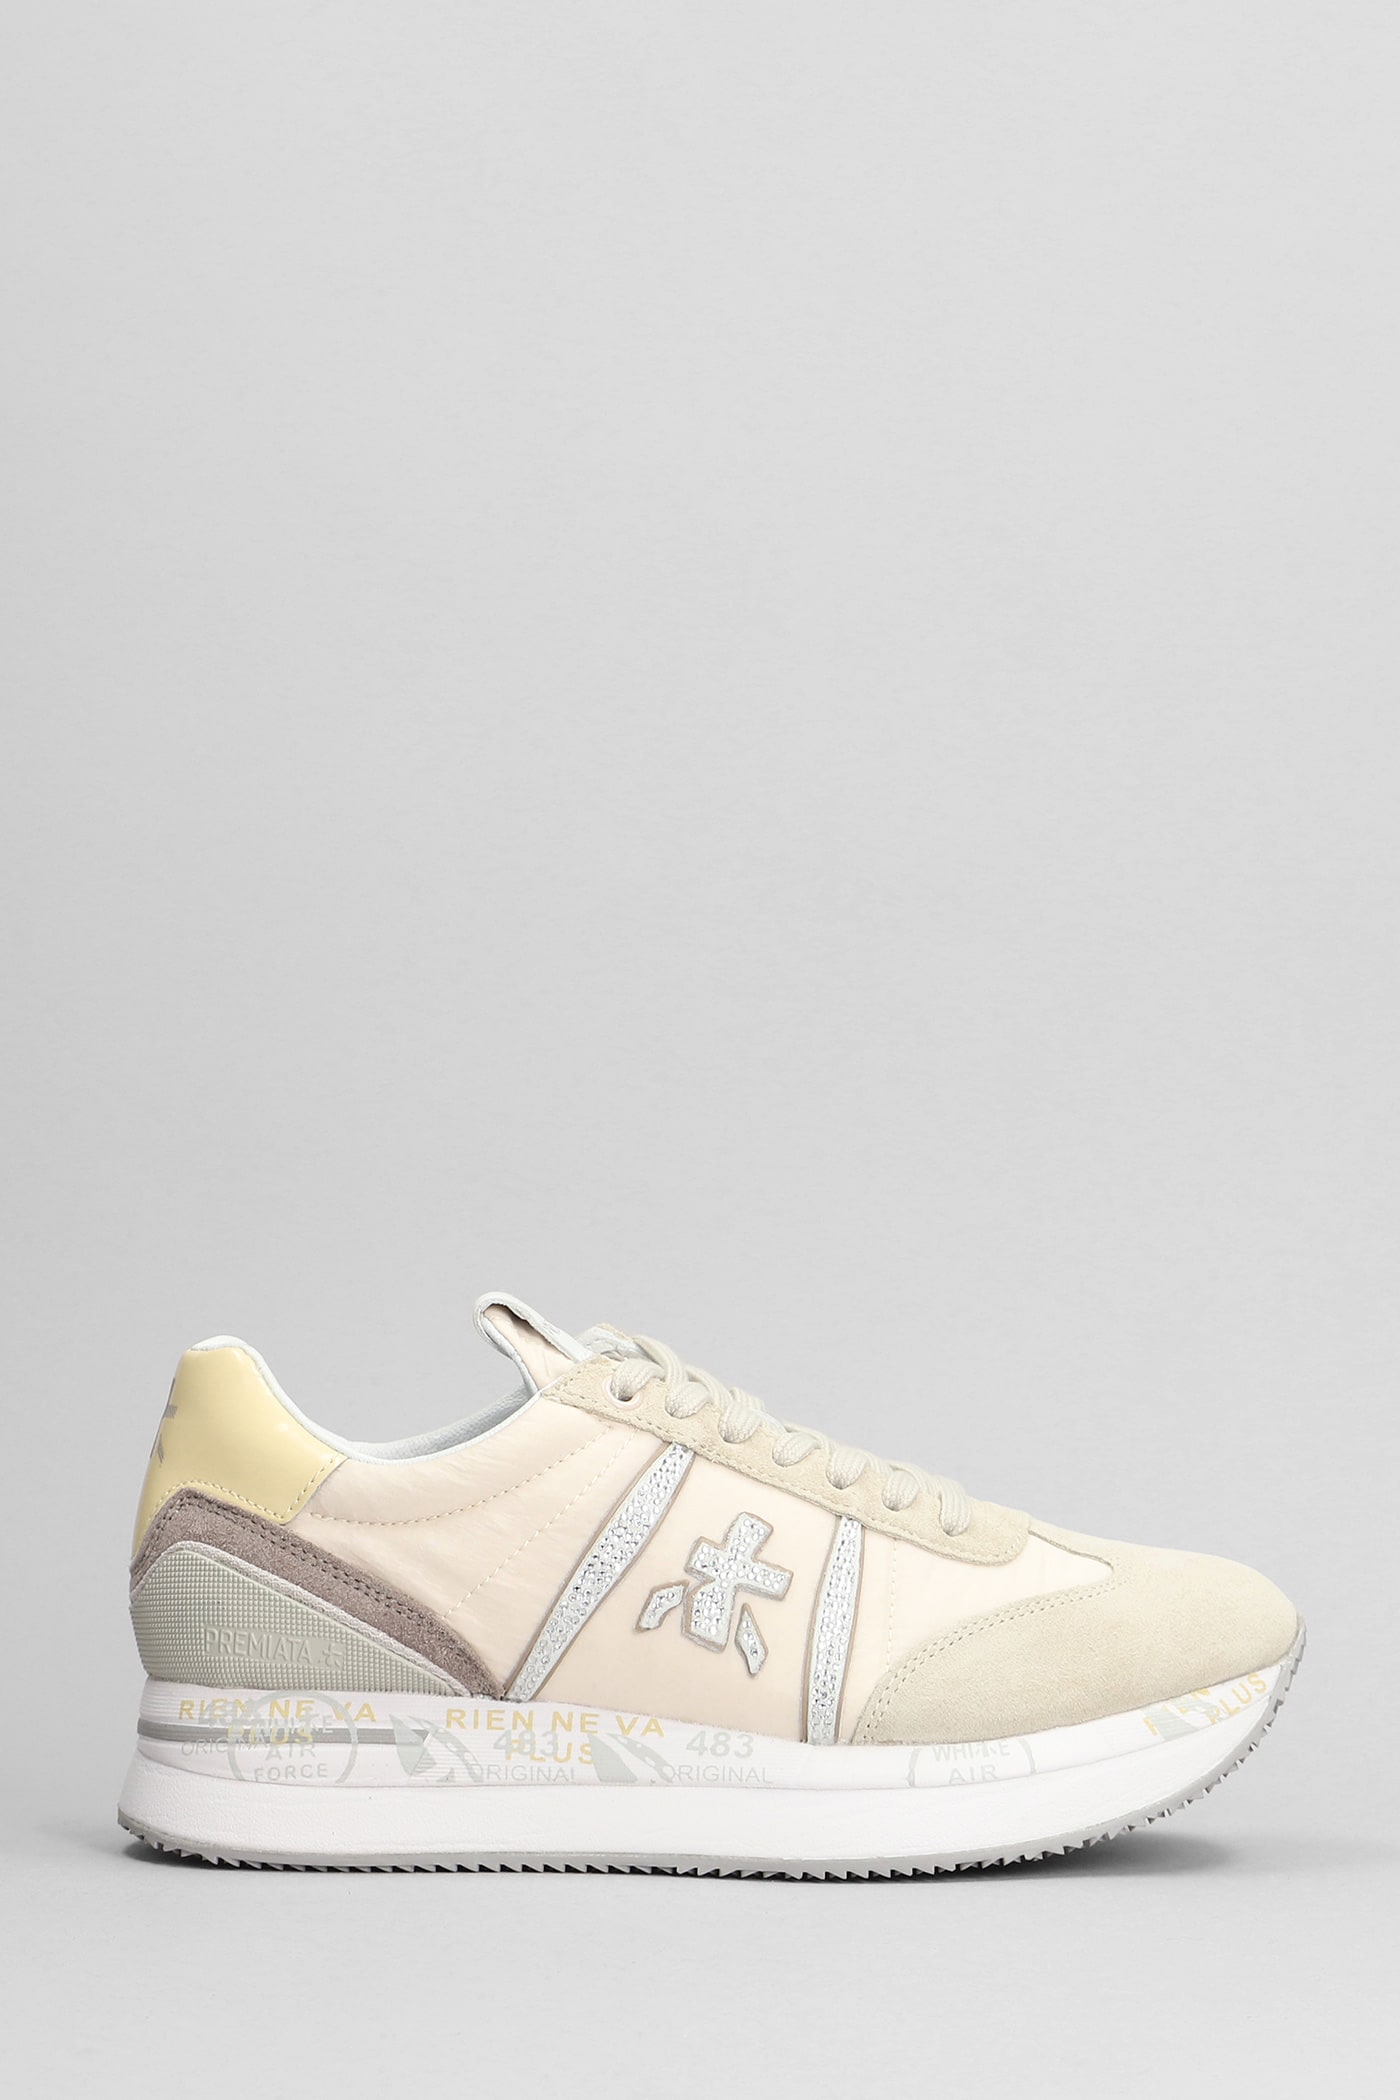 Premiata Conny Sneakers In Beige Suede And Fabric